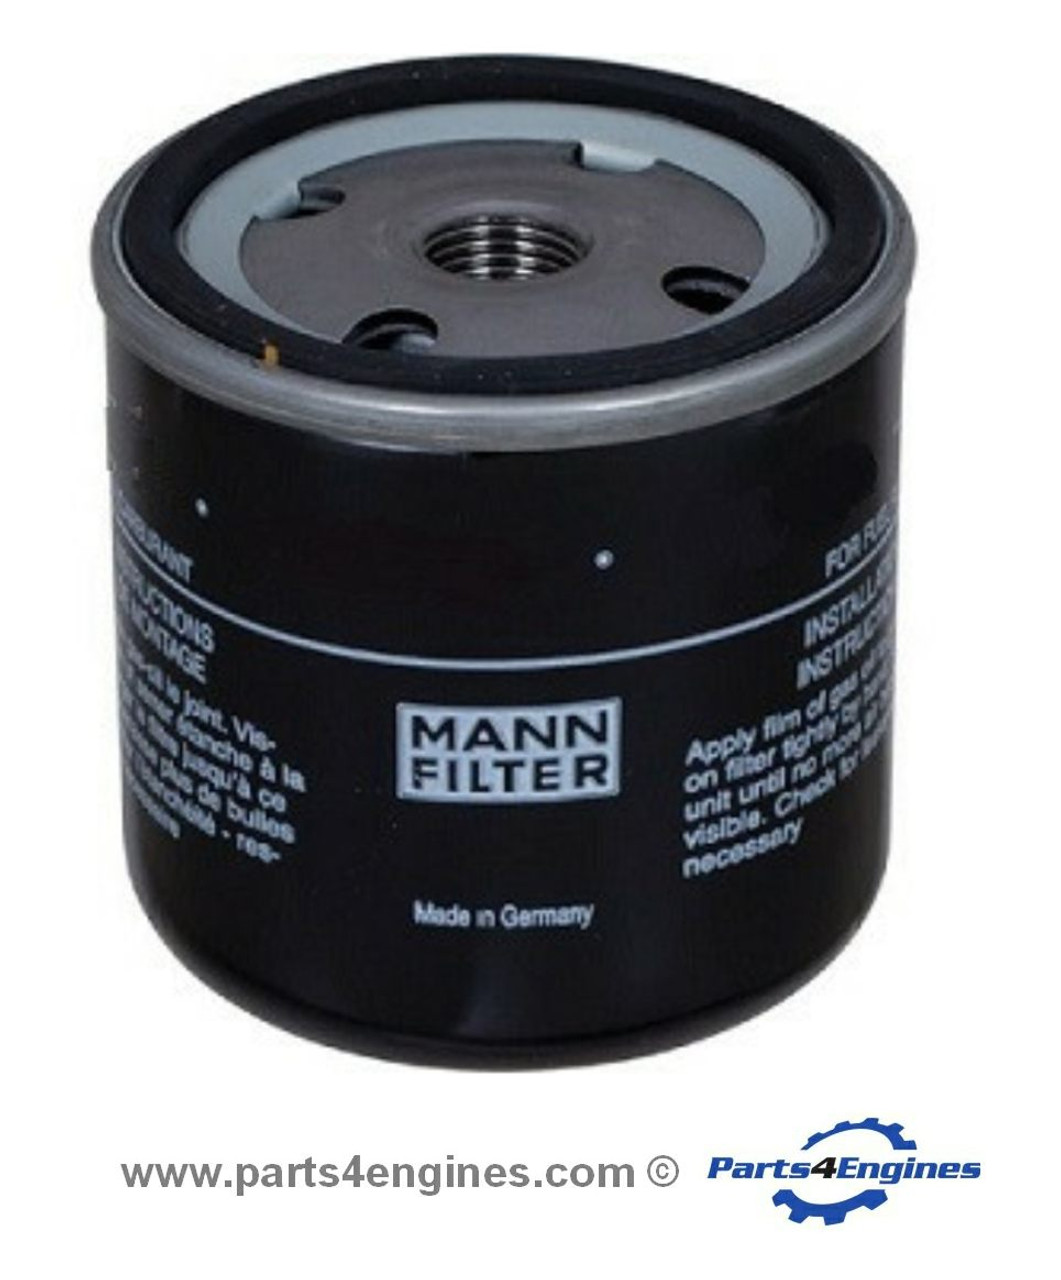 Yanmar 3JH Fuel Filter, from parts4engines.com